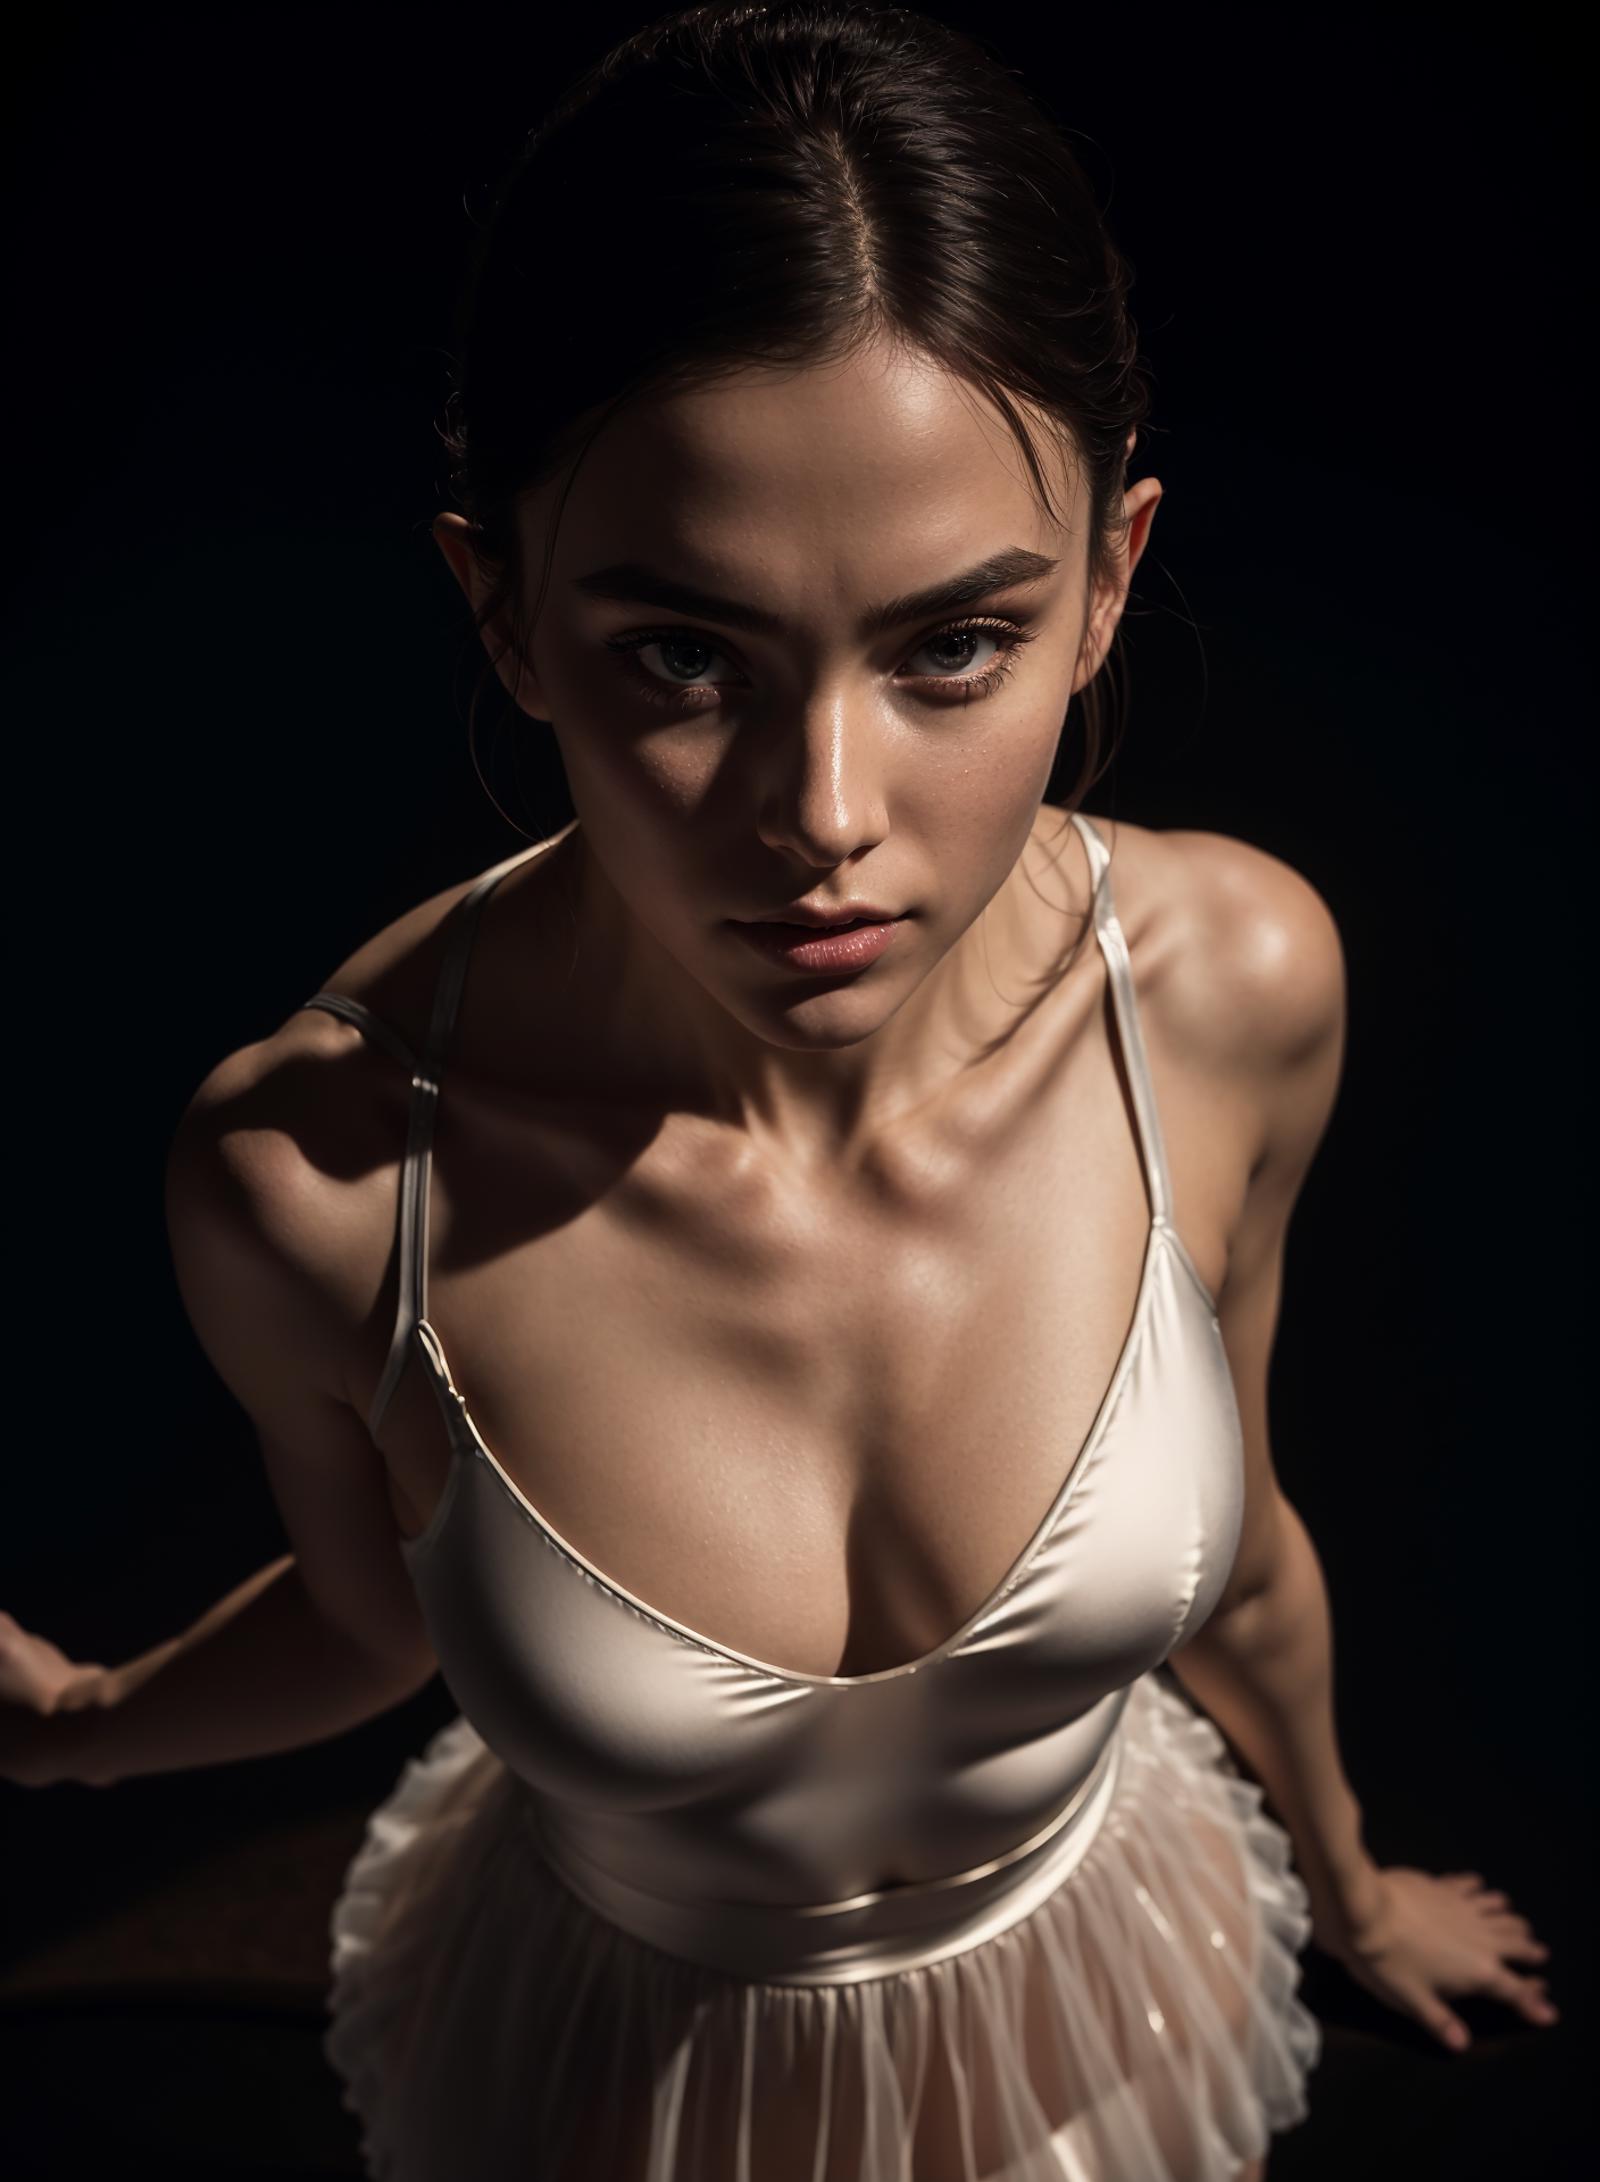 The image features a close-up of a woman with a prominent cleavage, wearing a white lace bra and dress. She is looking down and appears to be posing for a picture. The focus of the image is on her upper body, with her neck, chest, and shoulders prominently displayed. The woman's gaze directed downwards adds a sense of mystery and intrigue to the overall composition of the photo.